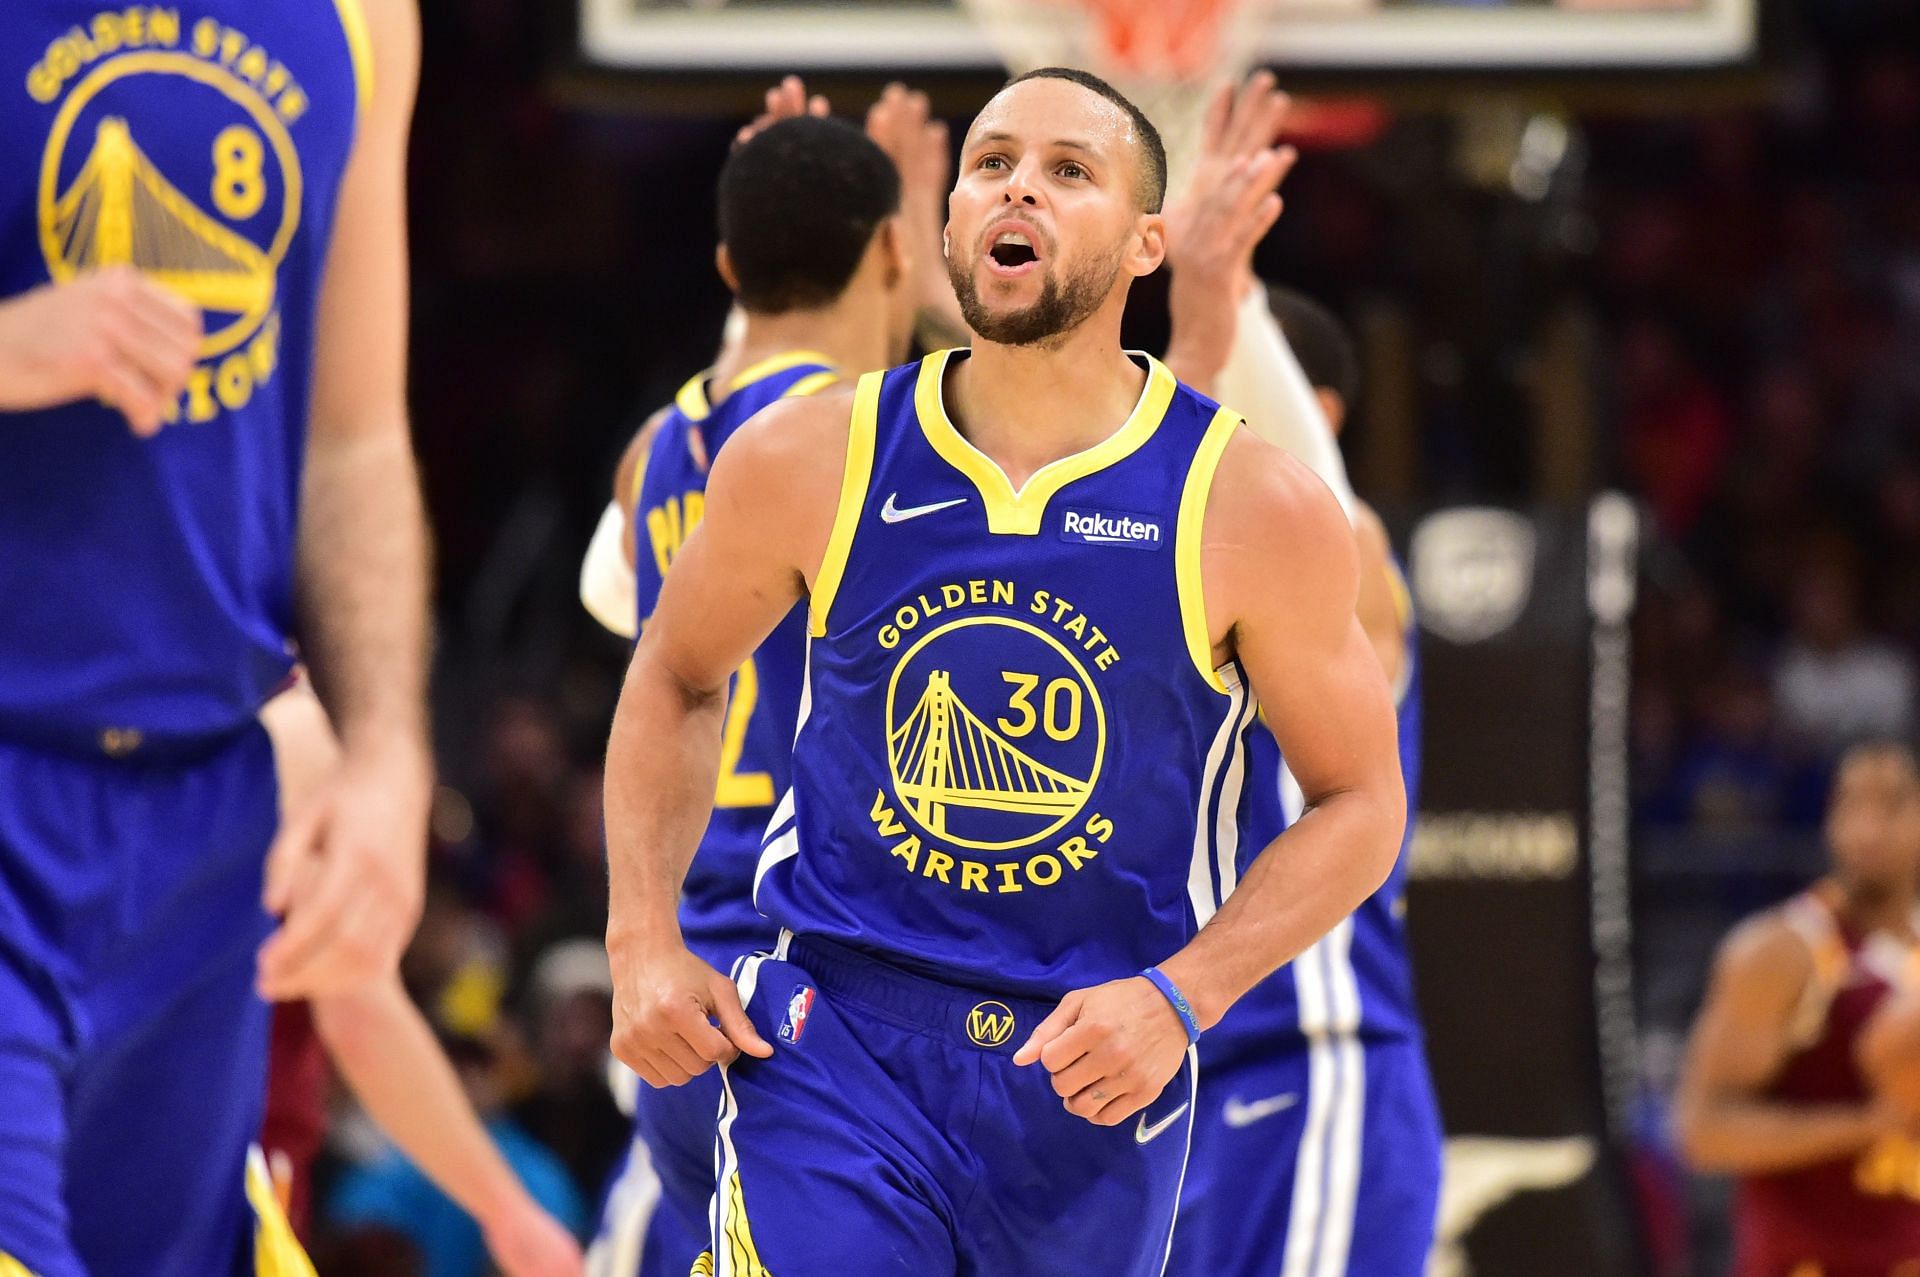 Muggsy Bogues is happy that Stephen Curry has developed into probably the greatest all-time shooter